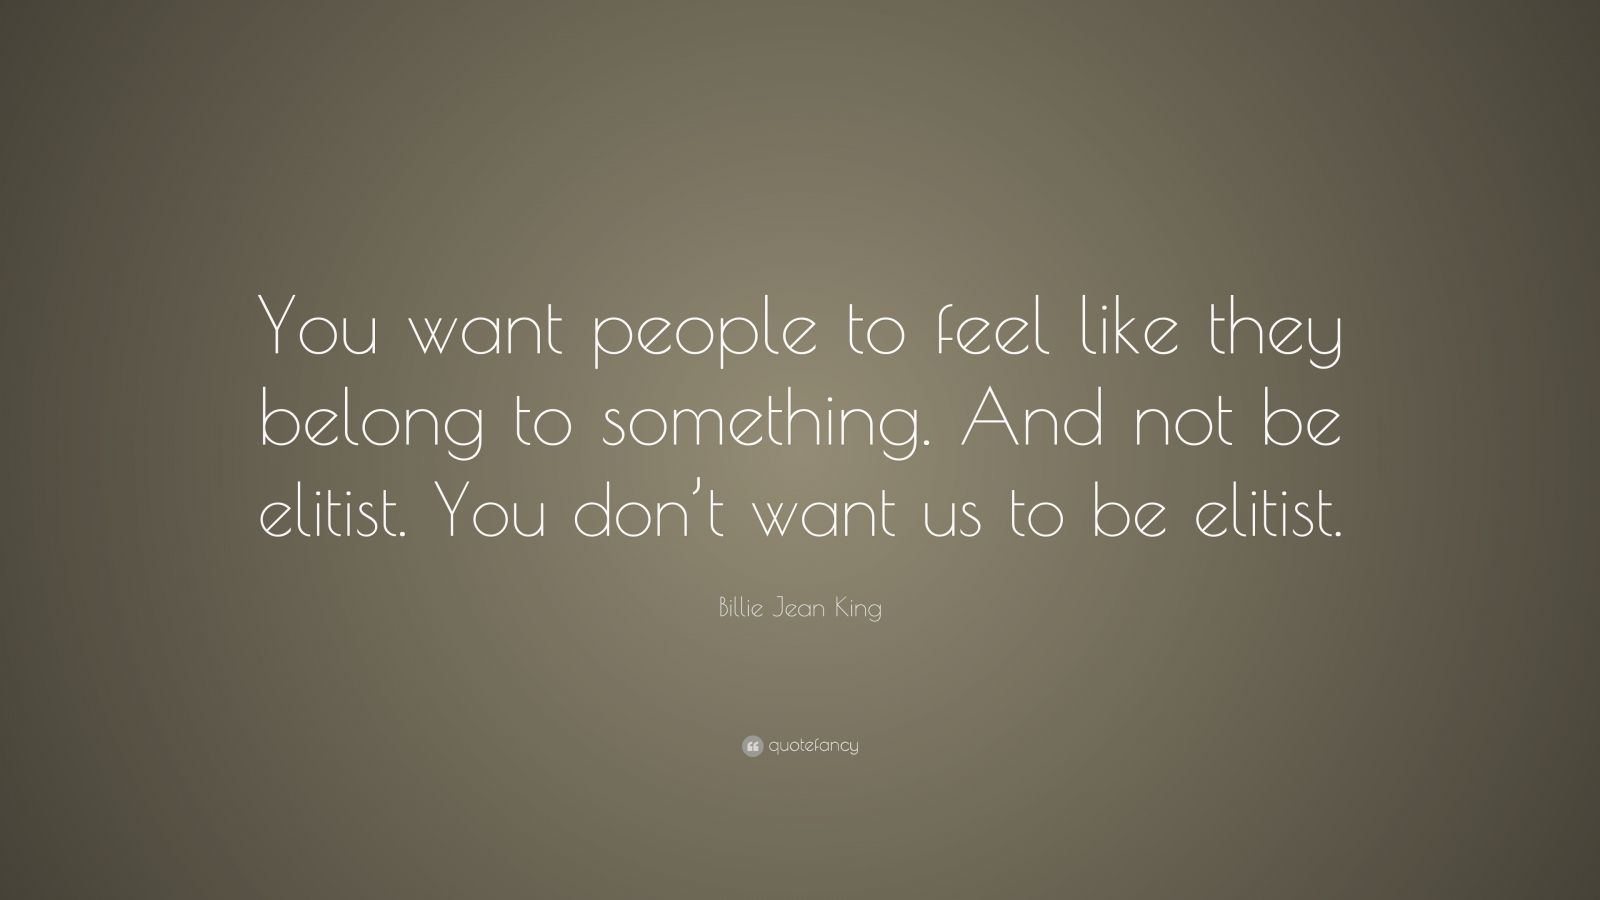 Billie Jean King Quote: “You want people to feel like they belong to ...